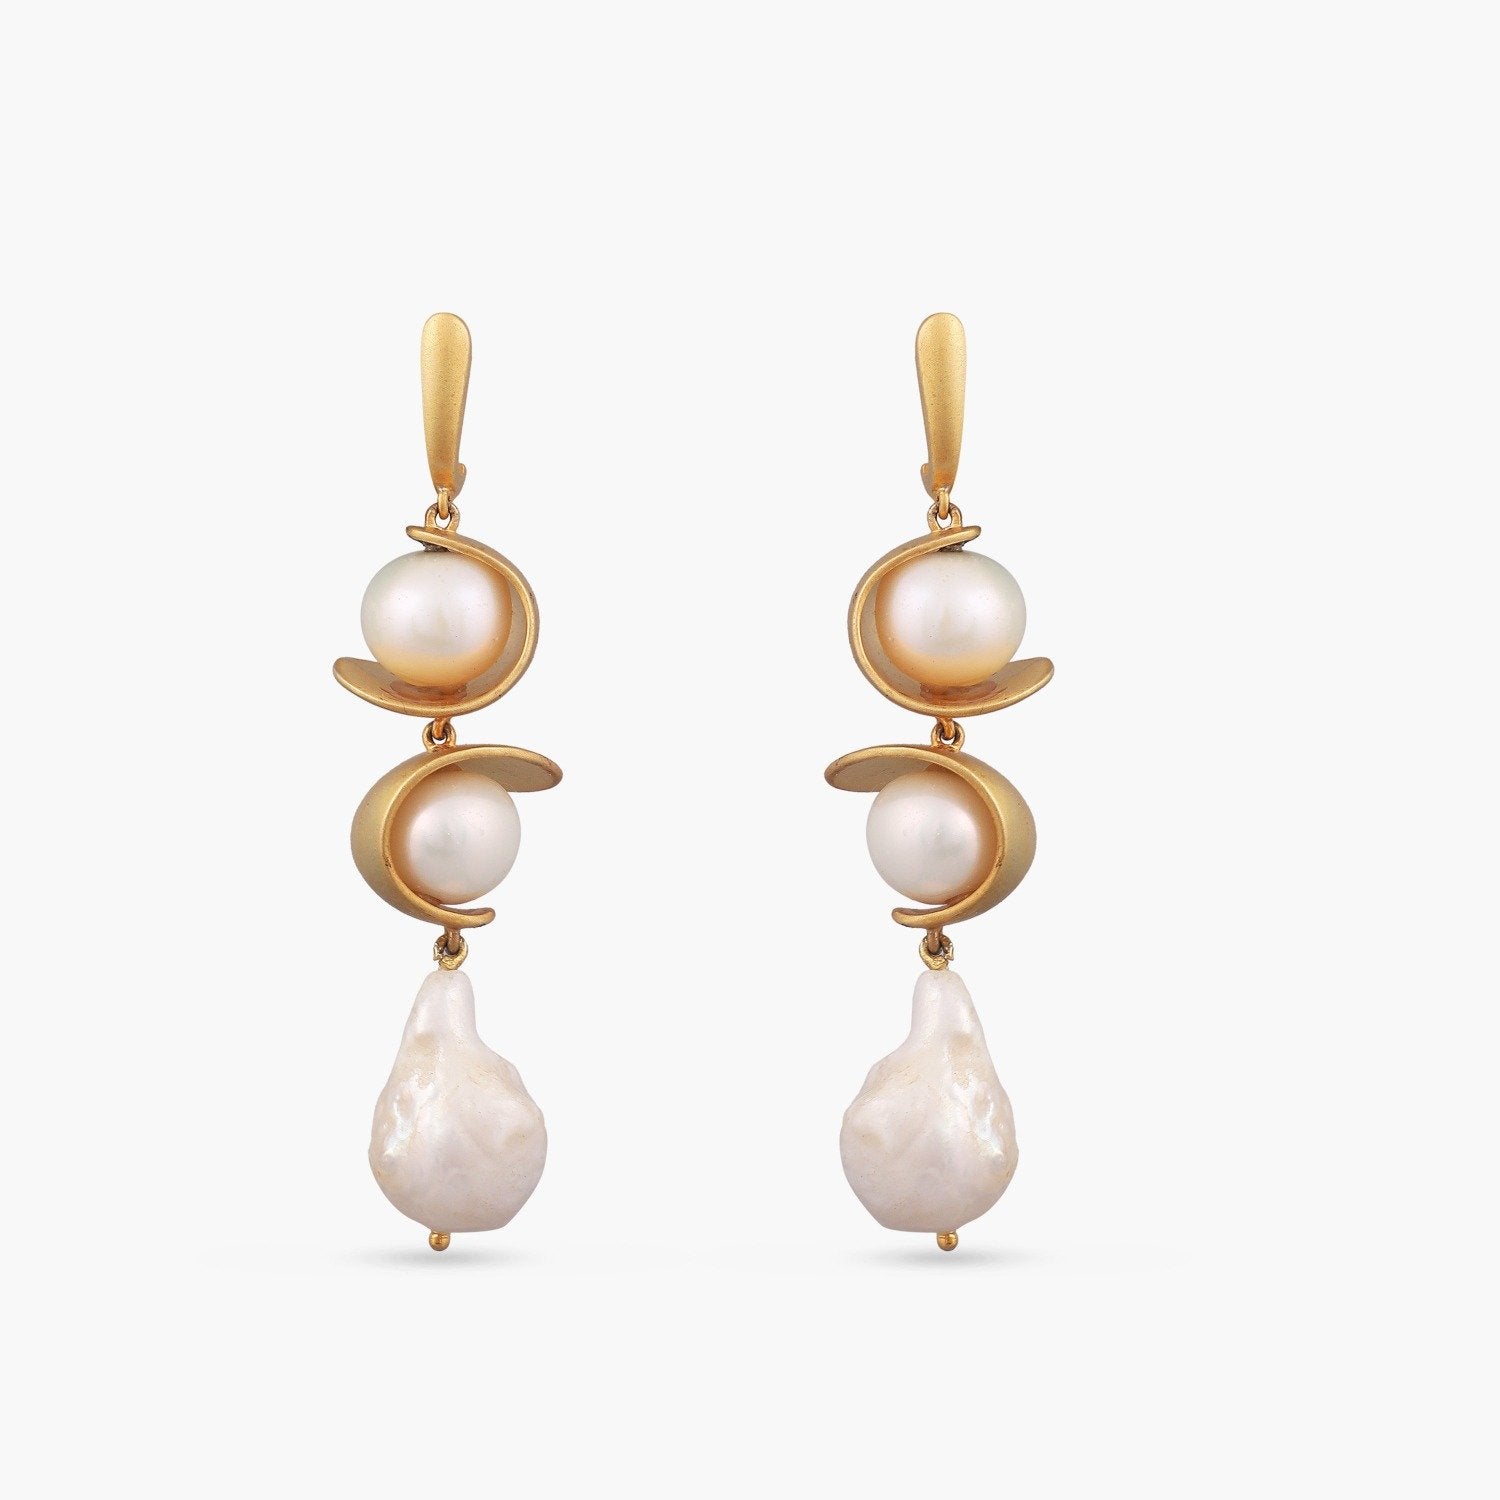 Share more than 203 baroque pearl earrings india best